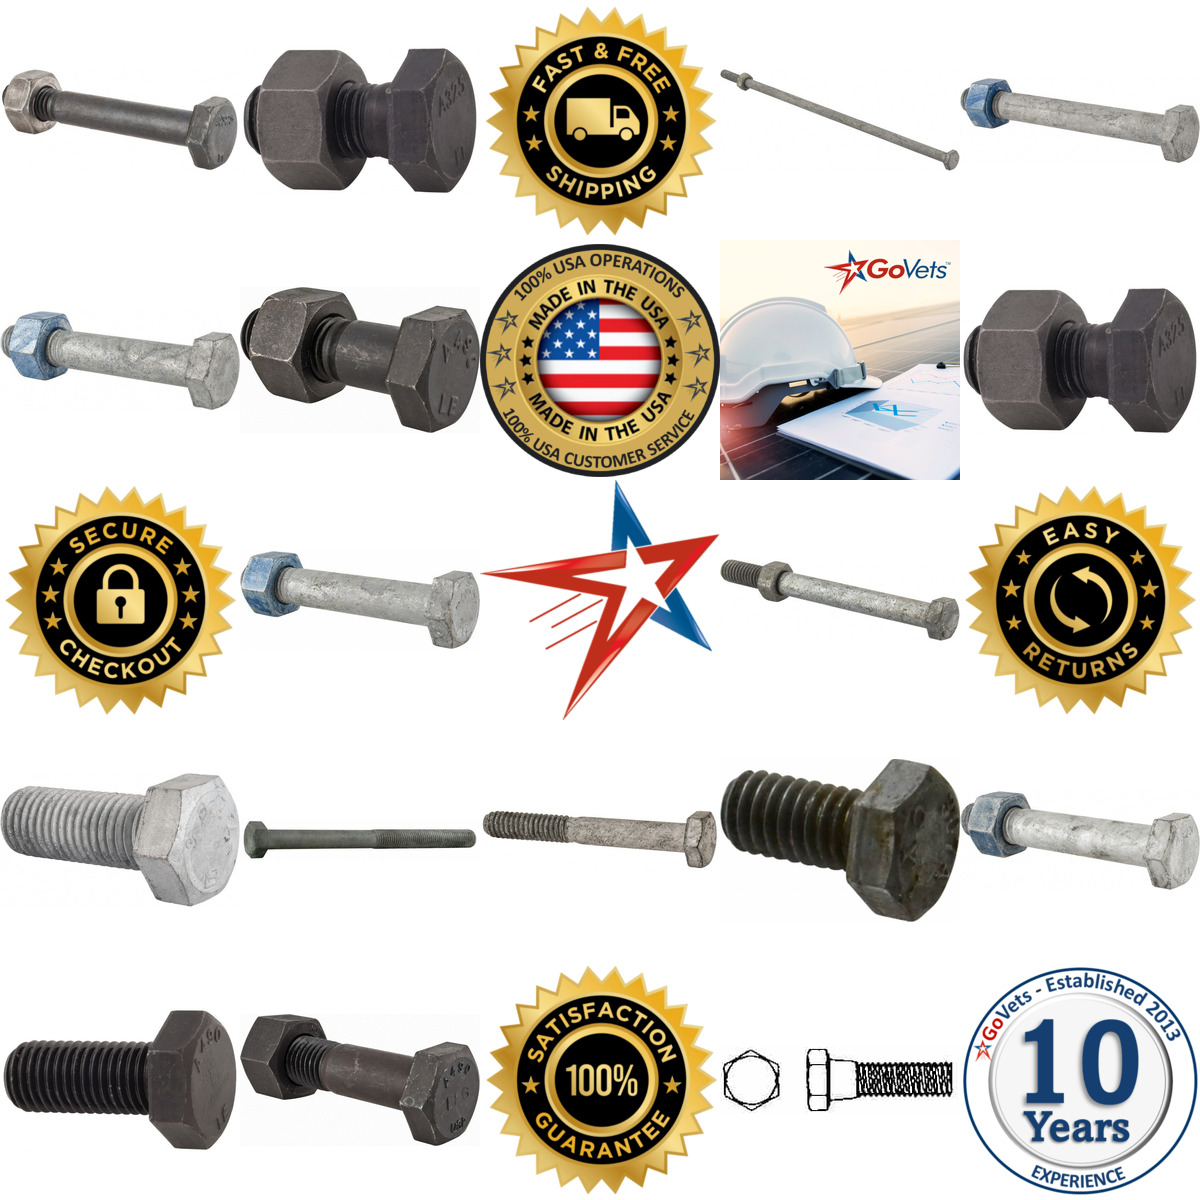 A selection of Hex Head Bolts products on GoVets